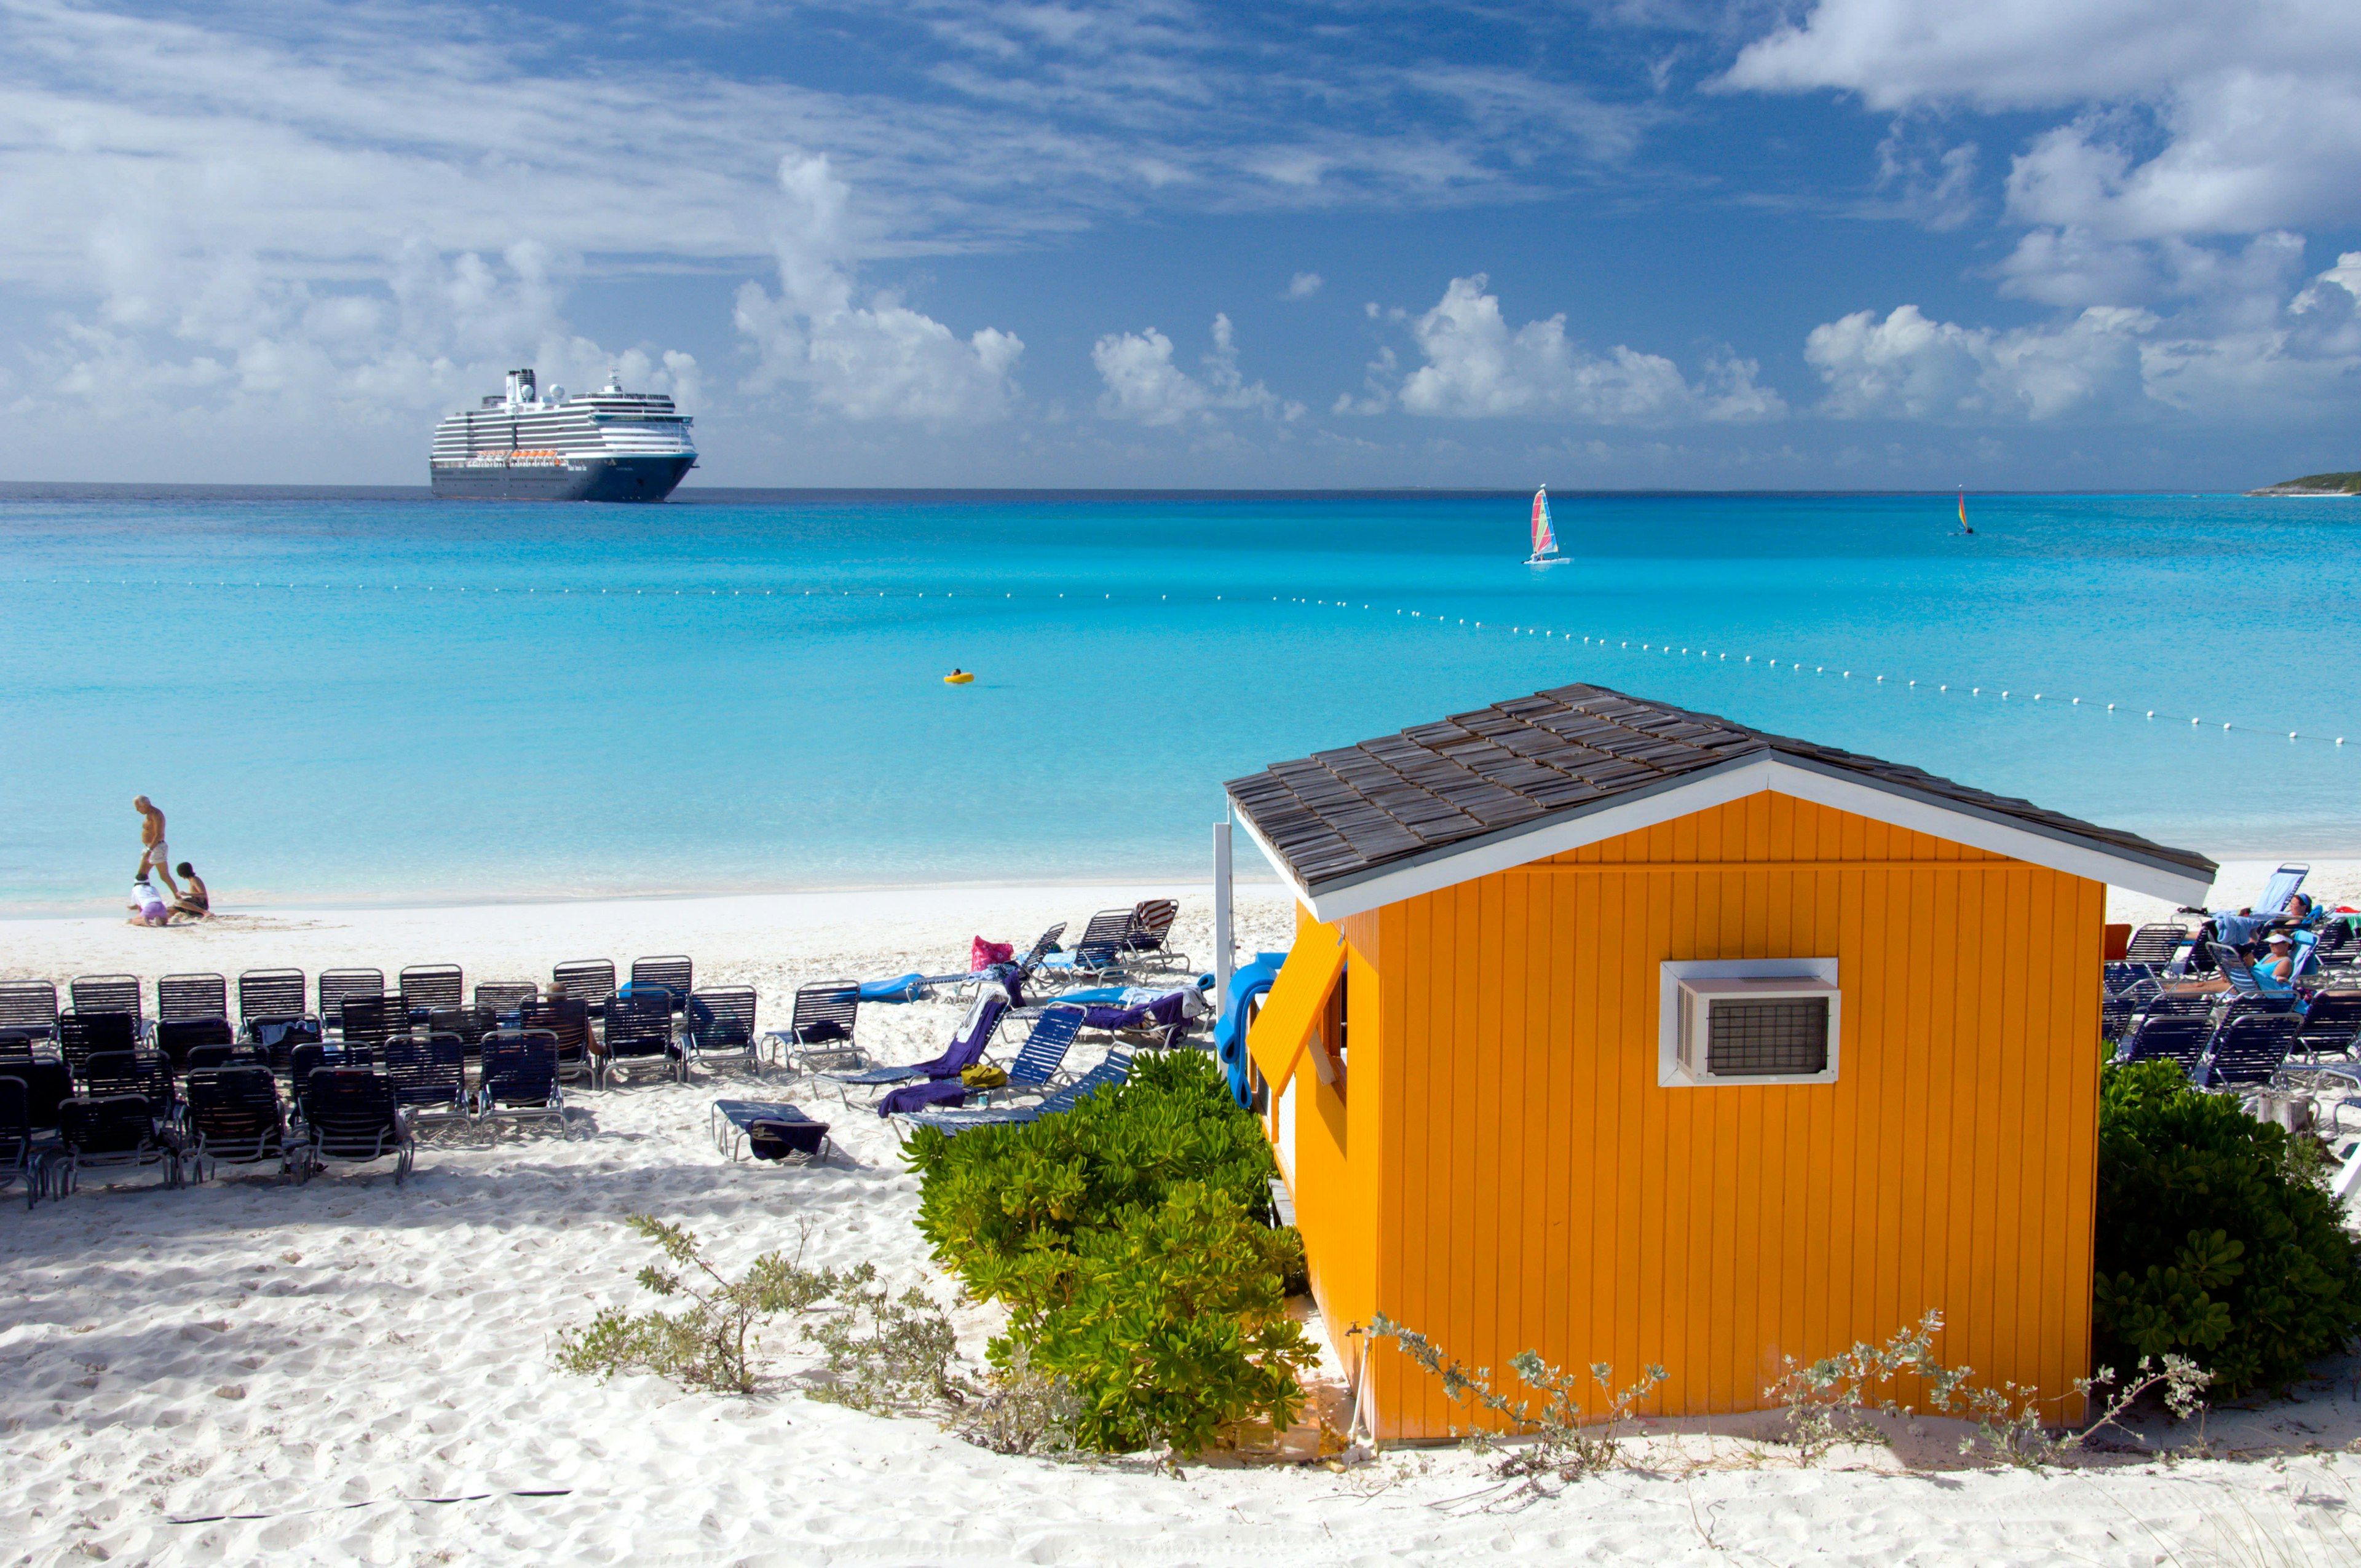 A colourful beach cabana with the Holland America cruise ship Westerdam in background at Half Moon Cay, Bahamas, Caribbean.